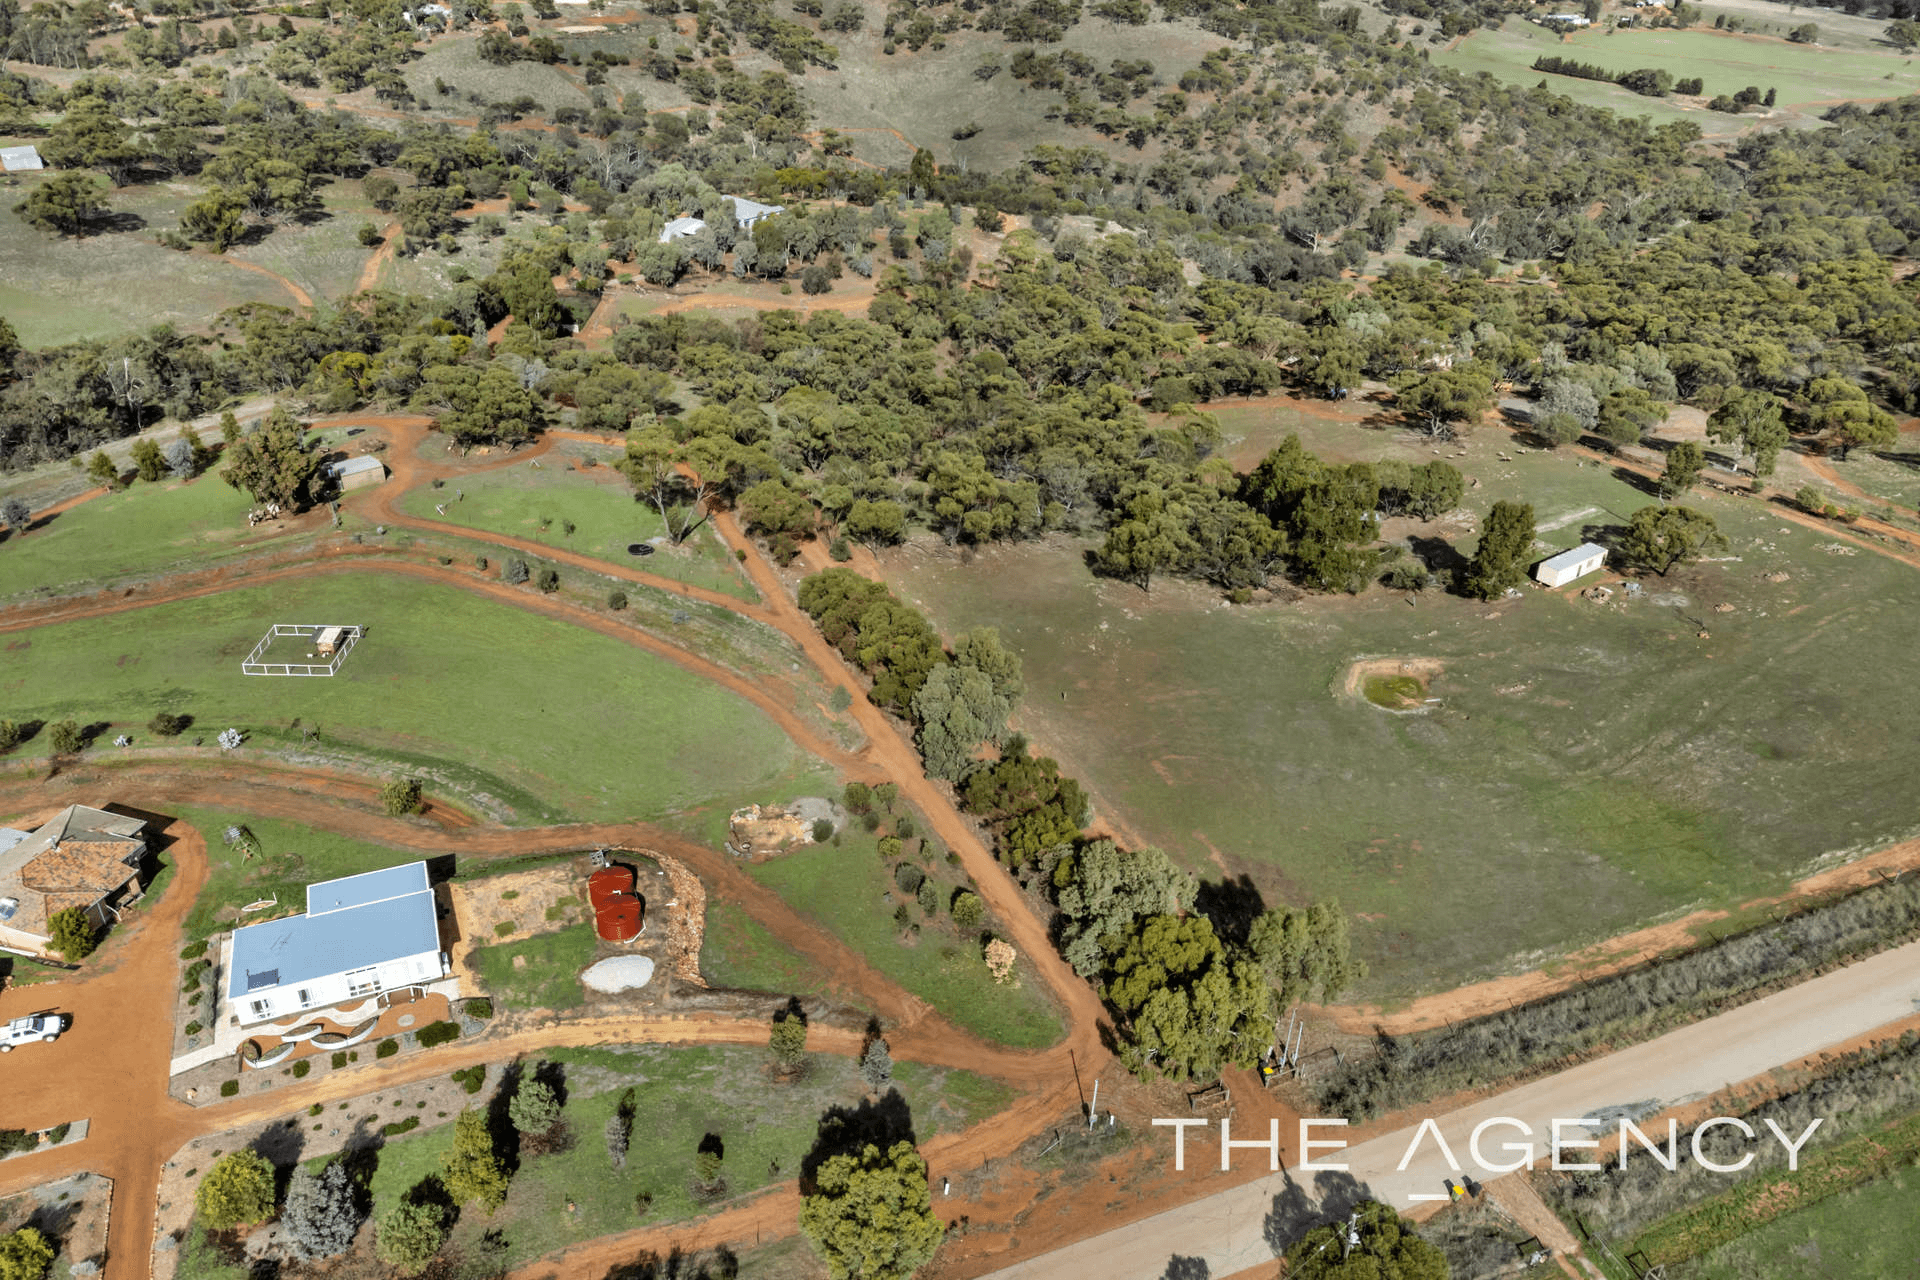 271 Coondle Drive, Coondle, WA 6566